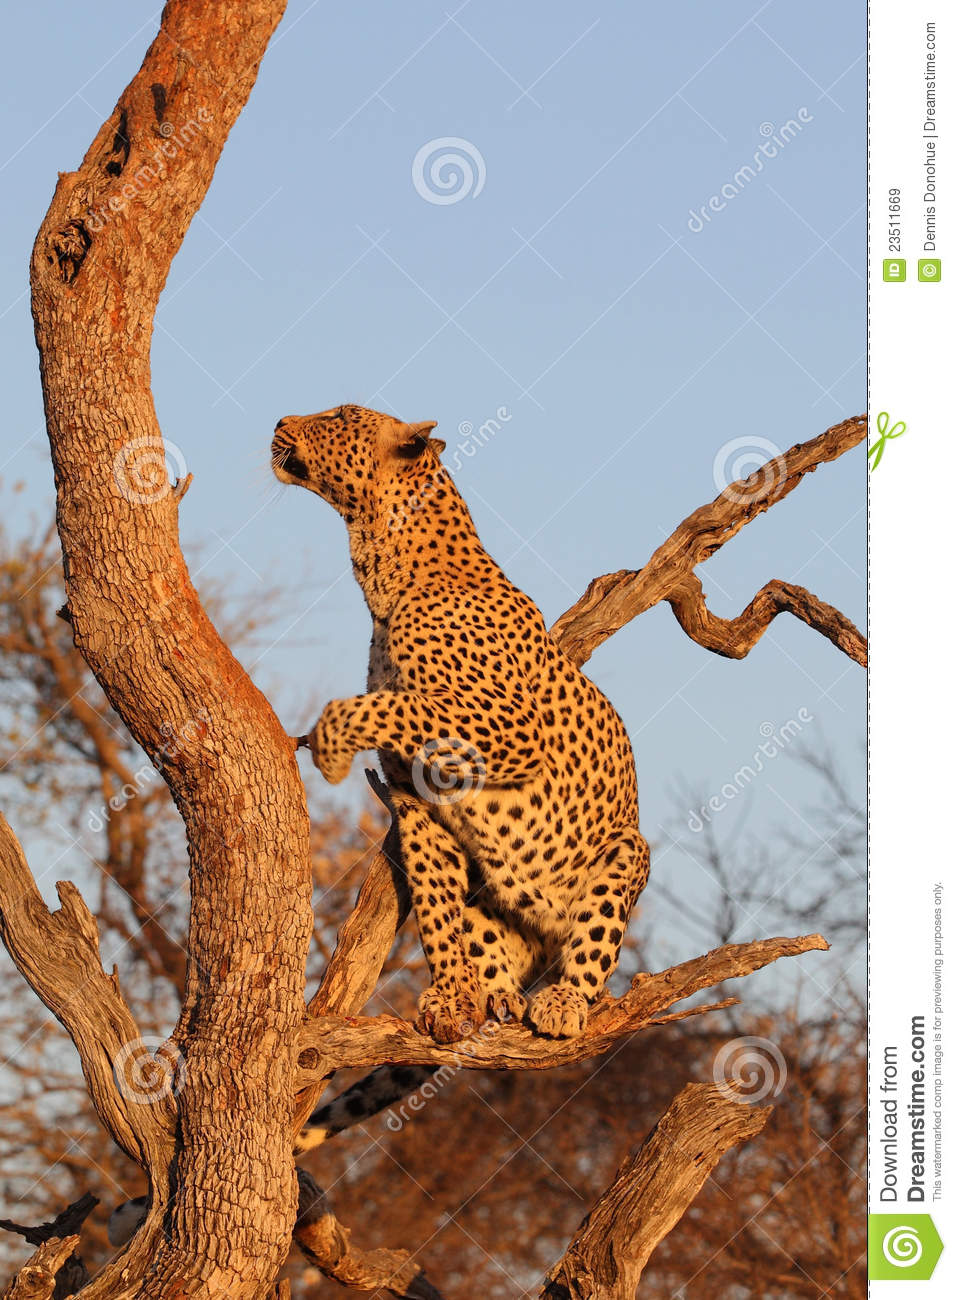 African Leopard In Tree Royalty Free Stock Images   Image  23511669